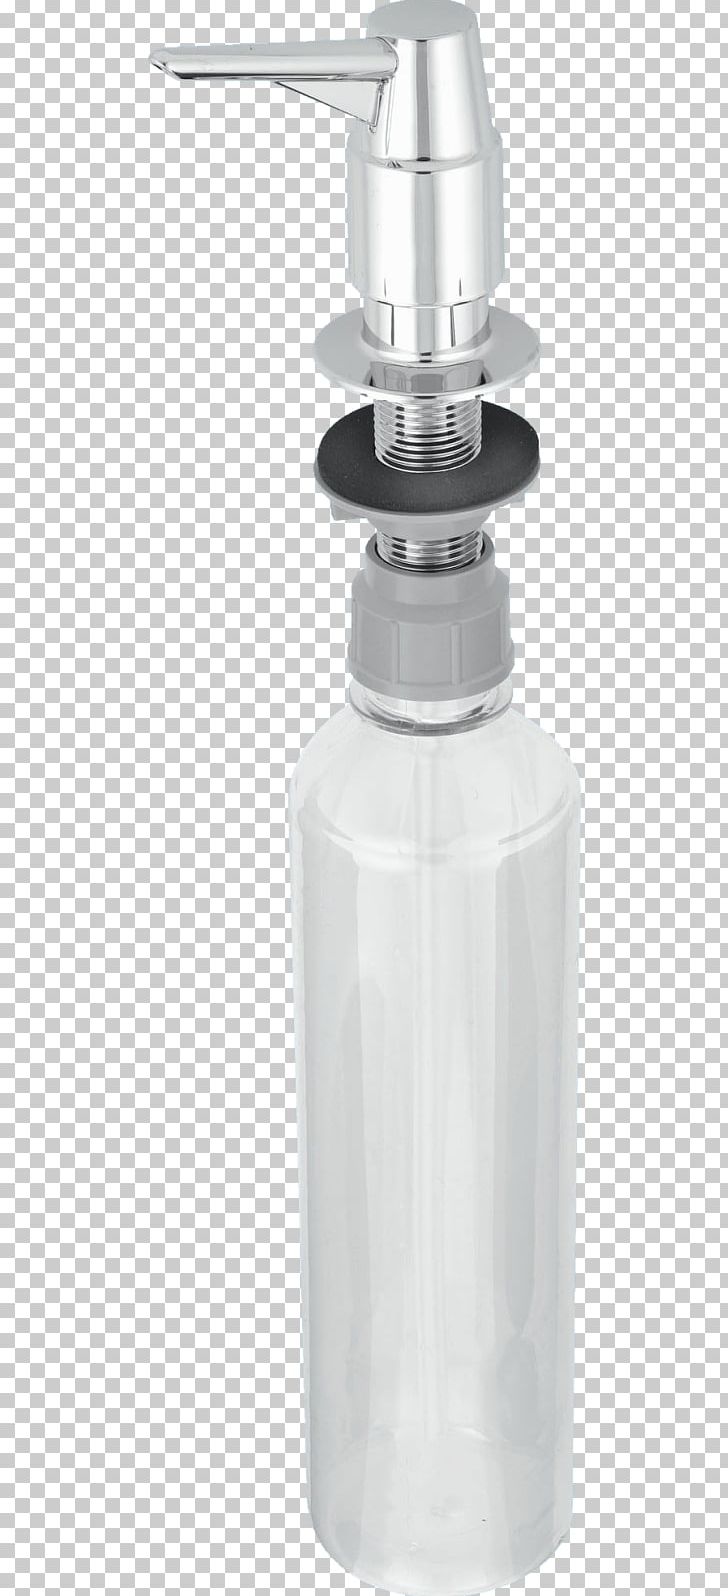 Soap Dispenser Glass PNG, Clipart, Bathroom Accessory, Carpentry, Chrome, Dispenser, Glass Free PNG Download